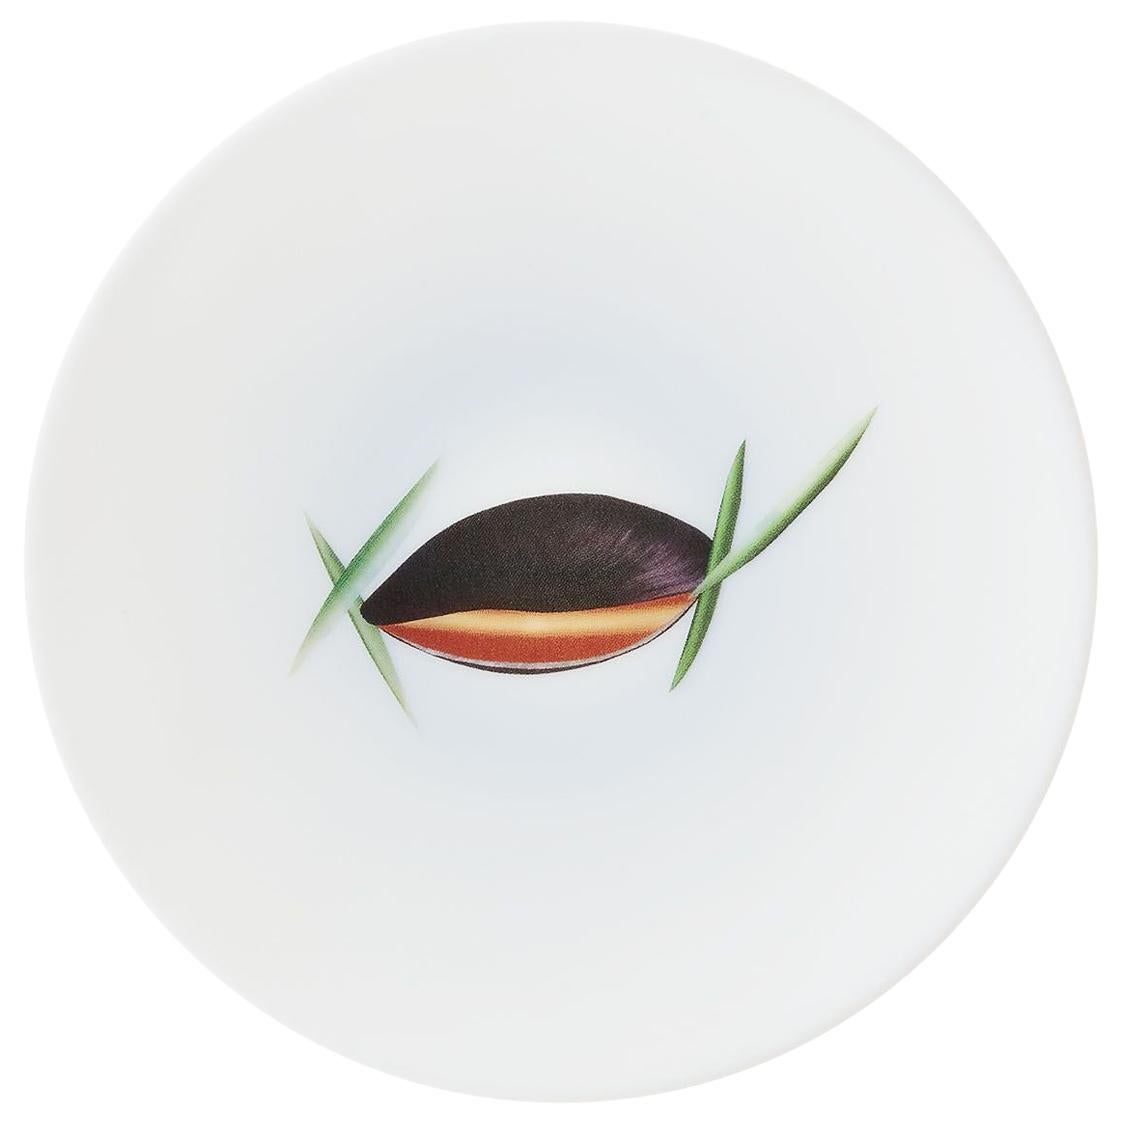 Bread Porcelain Plate By The Chef Alain Passard Model " Mold"